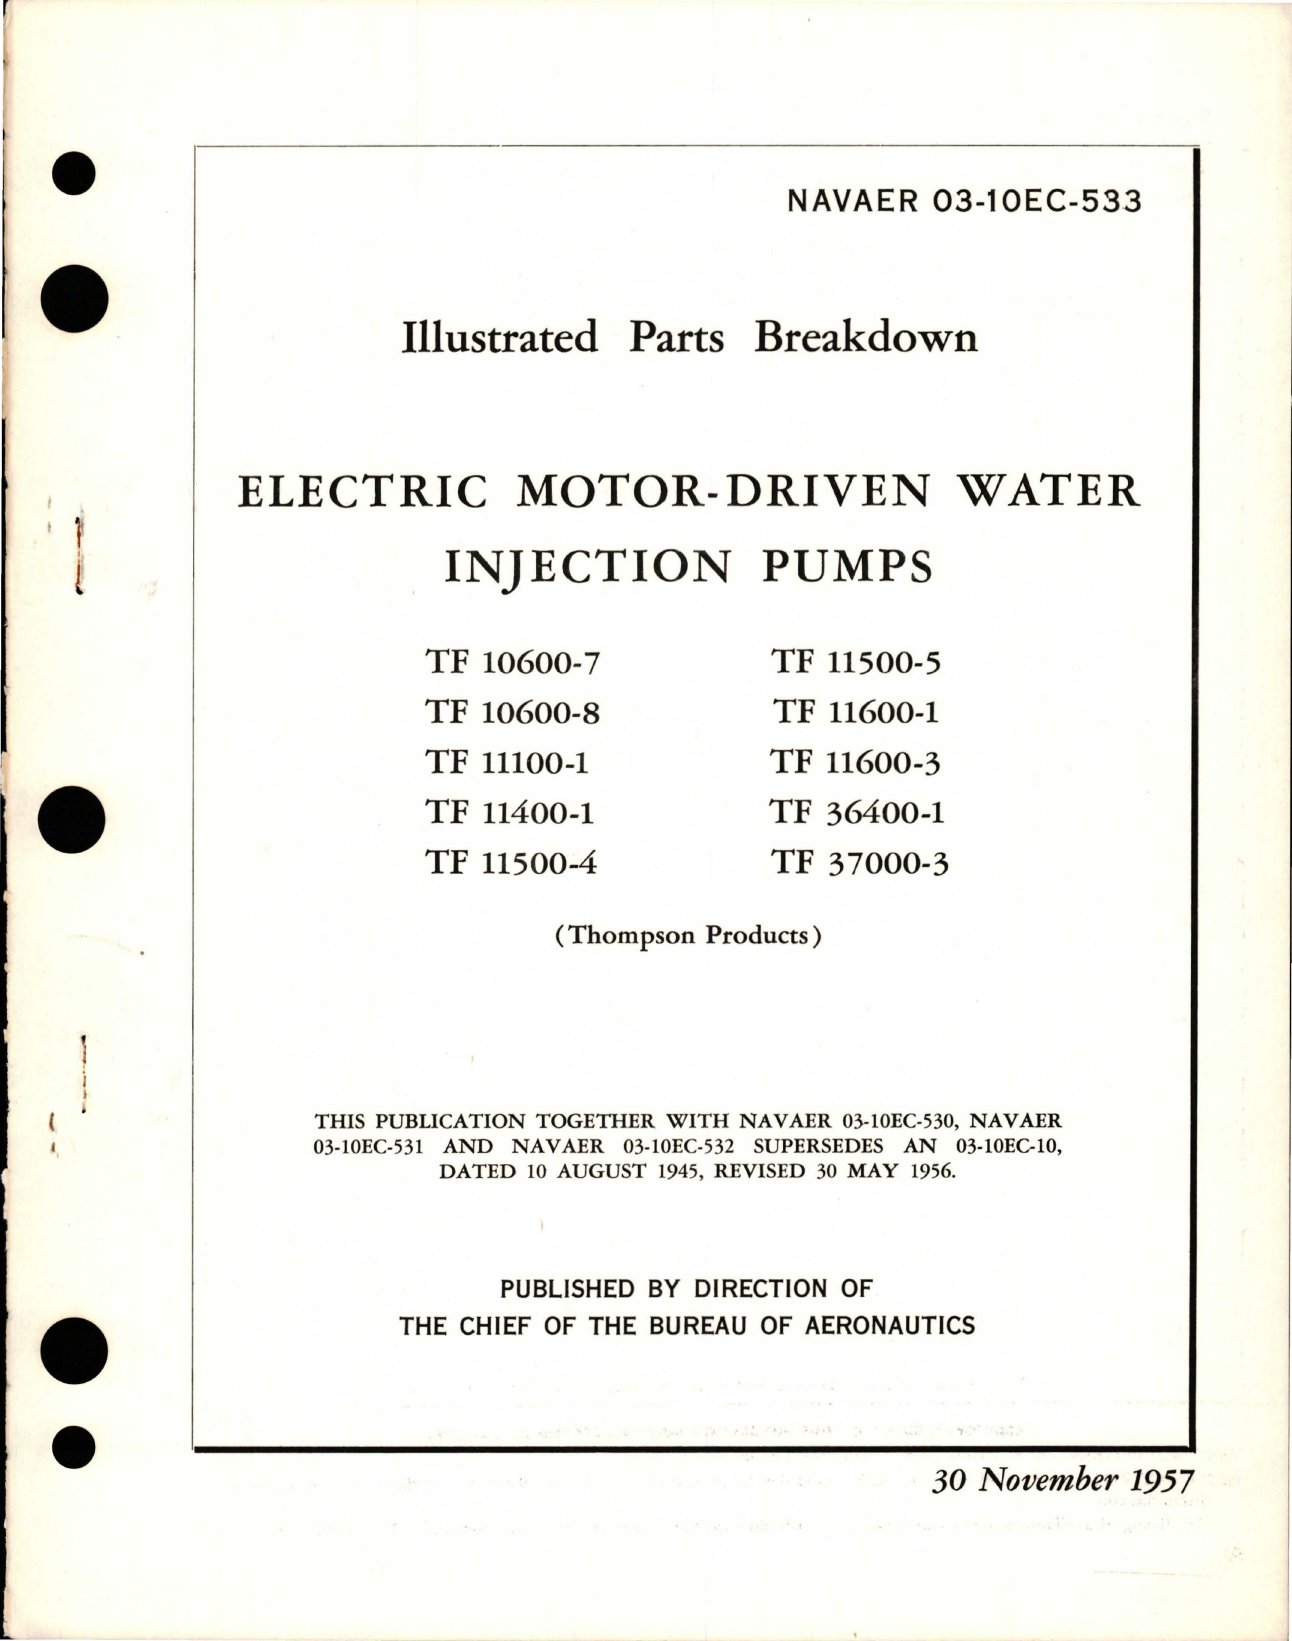 Sample page 1 from AirCorps Library document: Illustrated Parts Breakdown for Electric Motor-Driven Water Injection Pumps